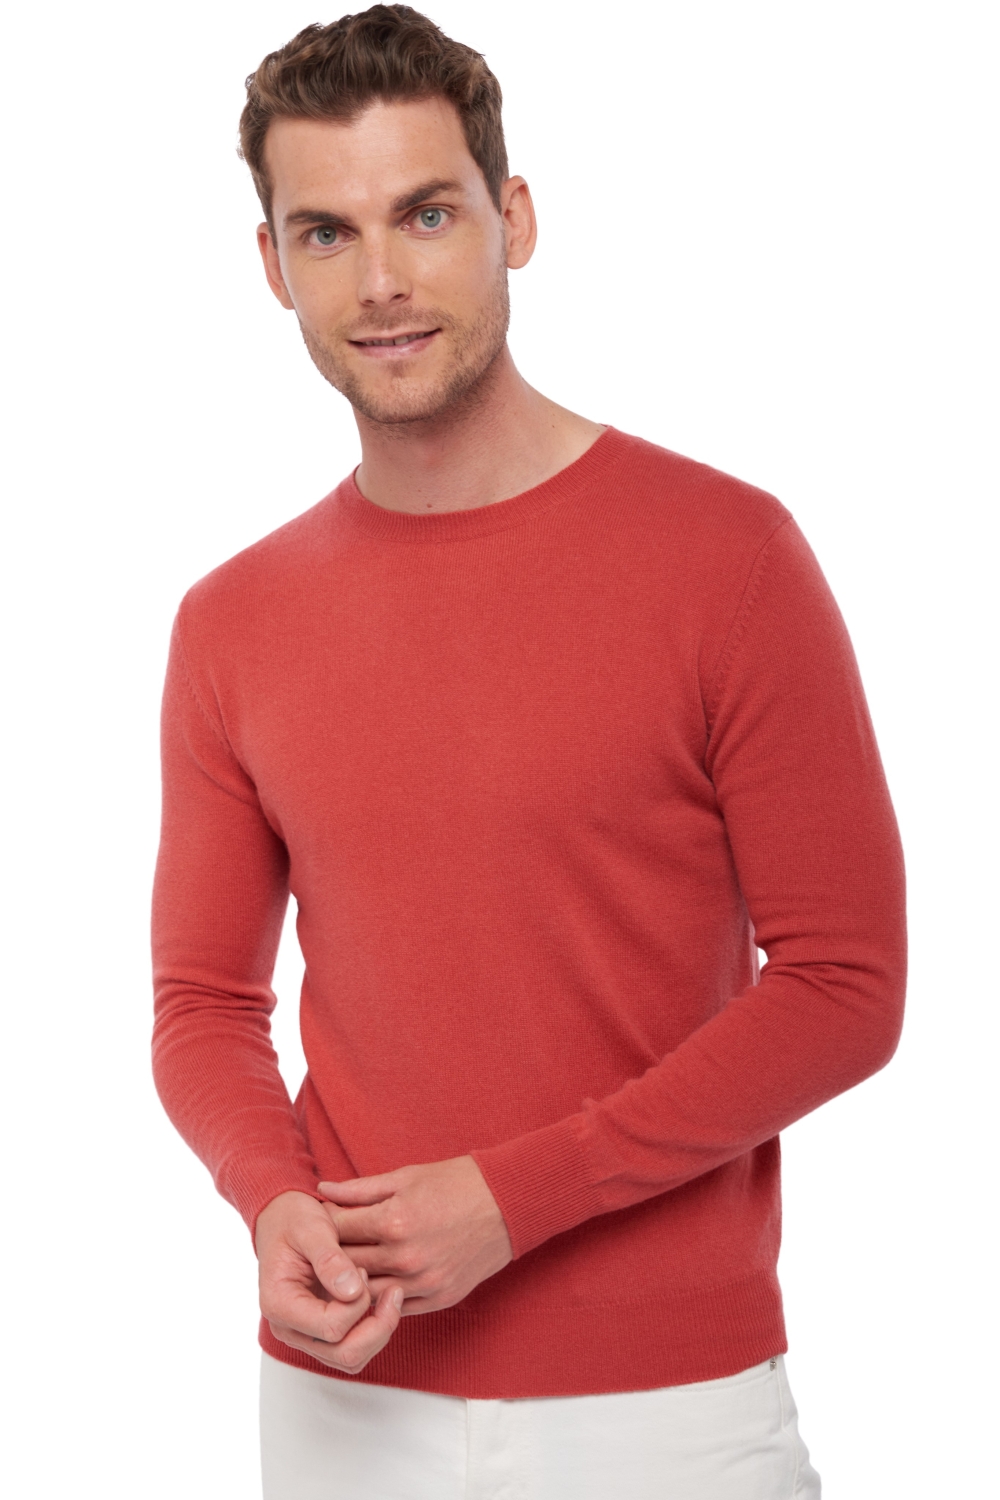 Cashmere men low prices tao first quite coral m